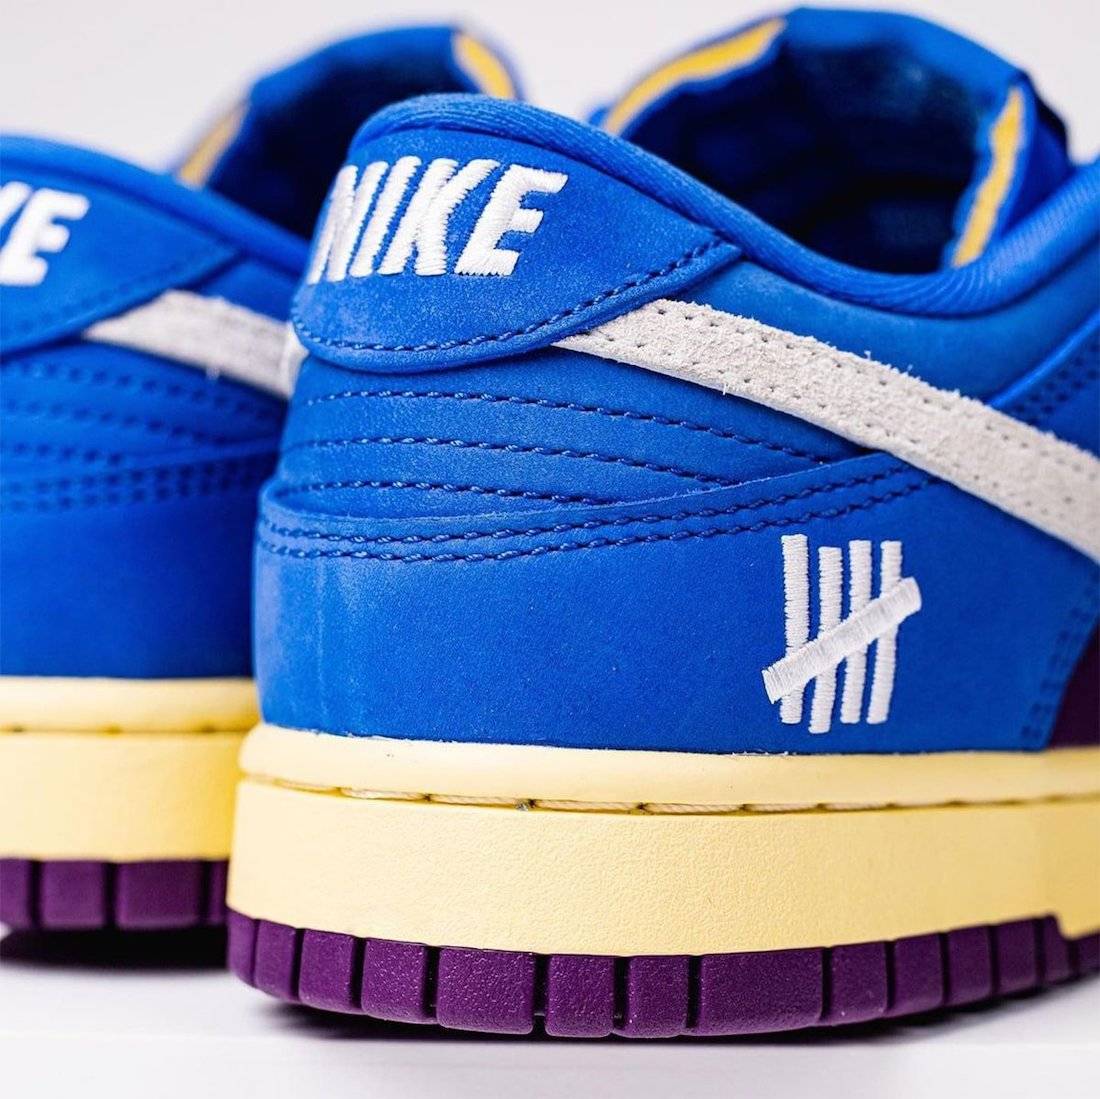 Undefeated-Nike-Dunk-Low-Blue-Purple-DH6508-400-Release-Date-9